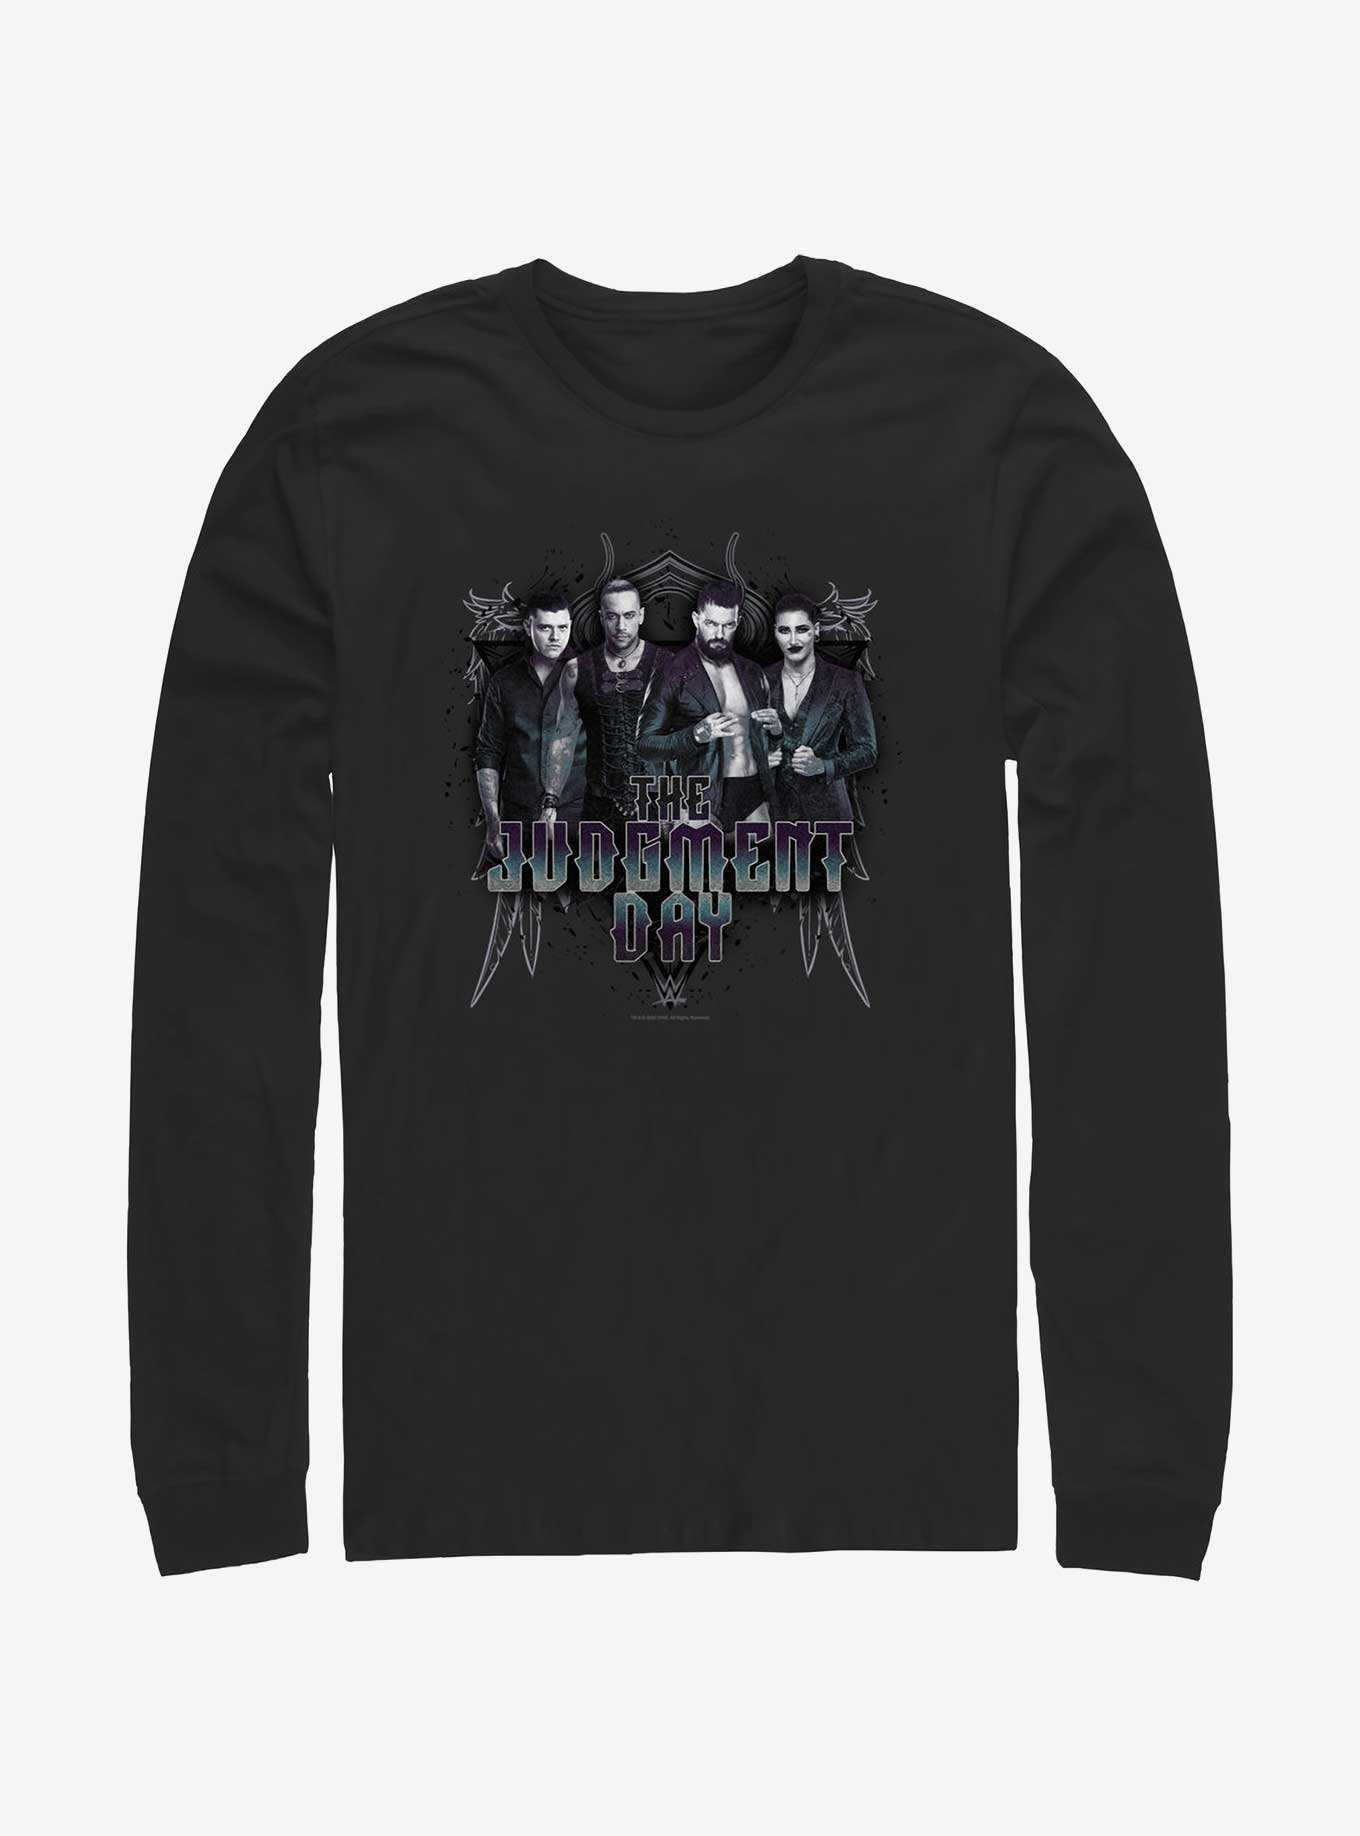 WWE Judgment Day Long-Sleeve T-Shirt, , hi-res